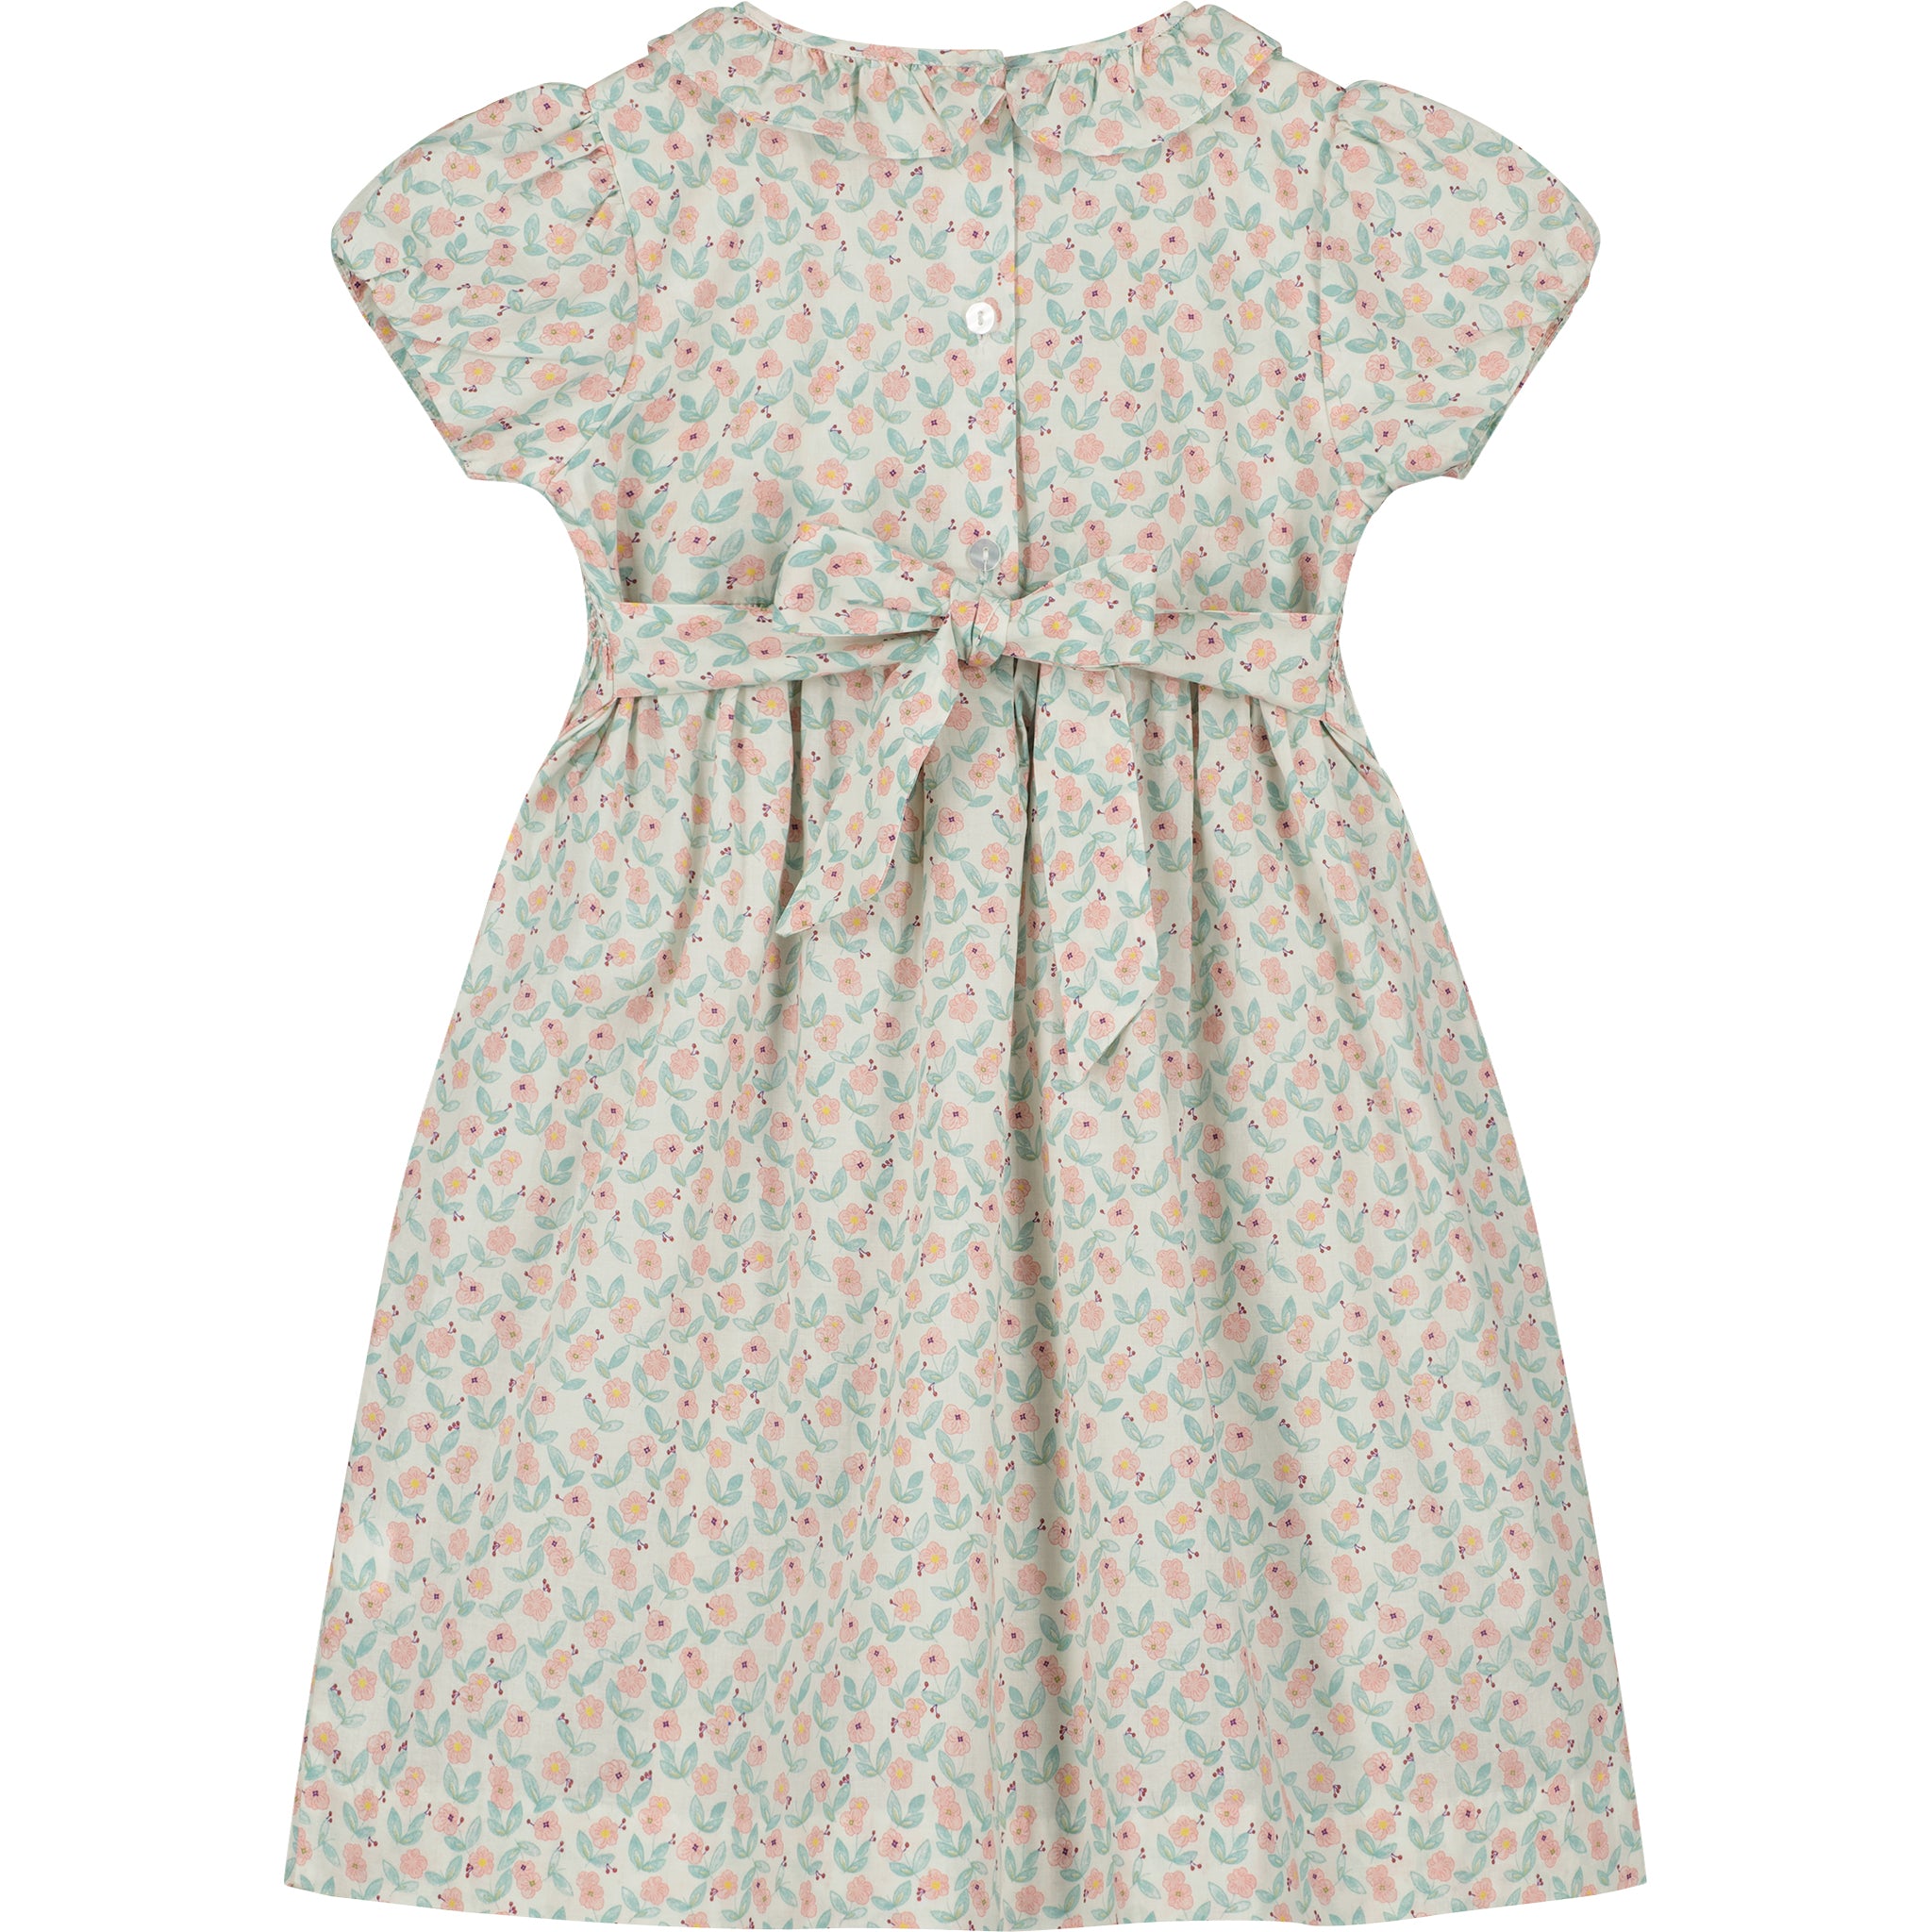 hand-smocked girls dress with frill collar, back